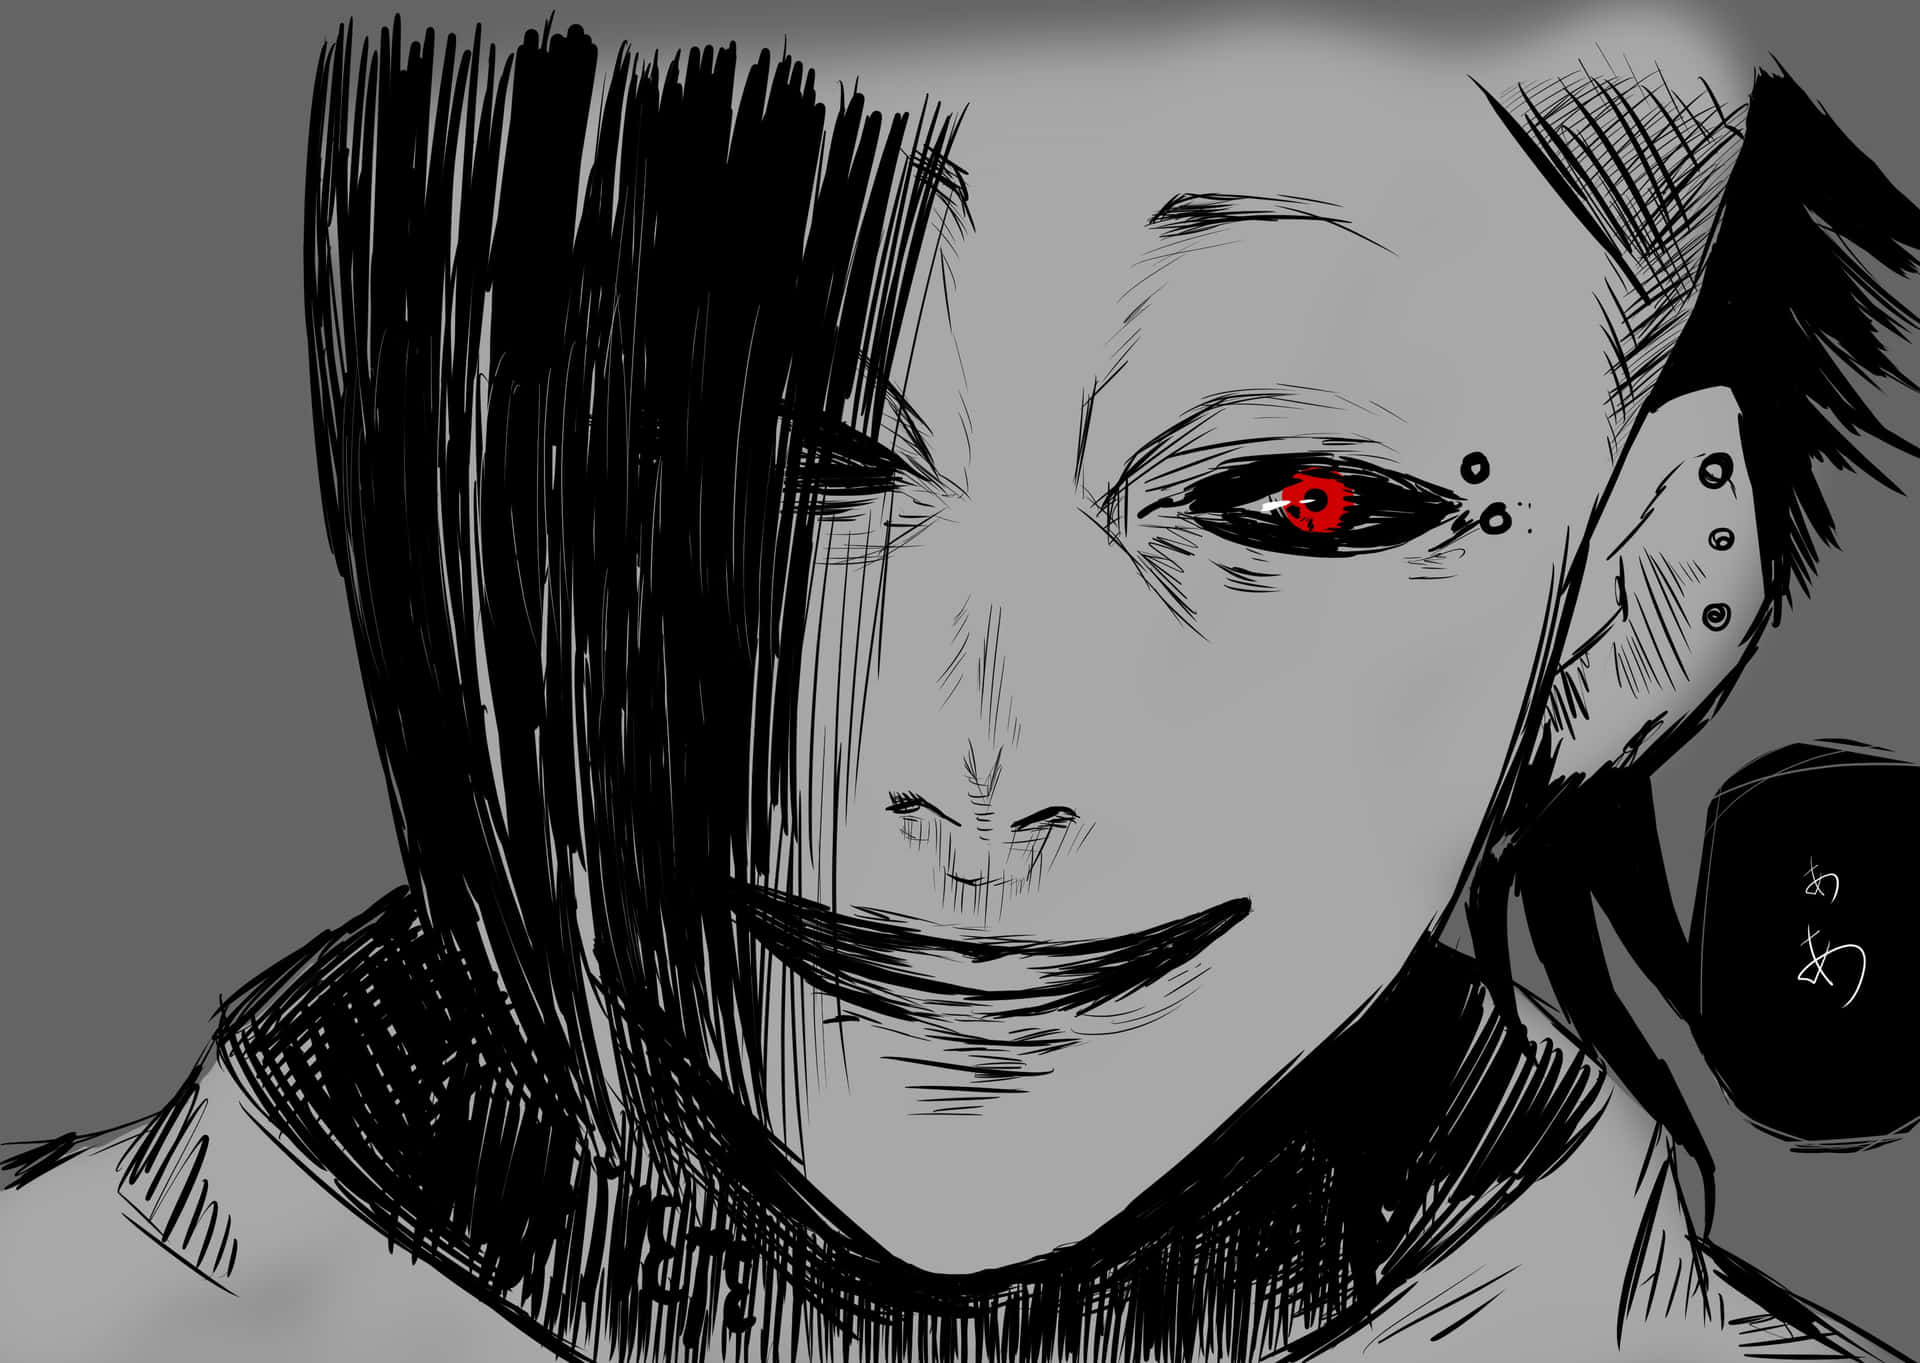 Uta, a mysterious tattoo artist and mask-maker from the anime, Tokyo Ghoul. Wallpaper